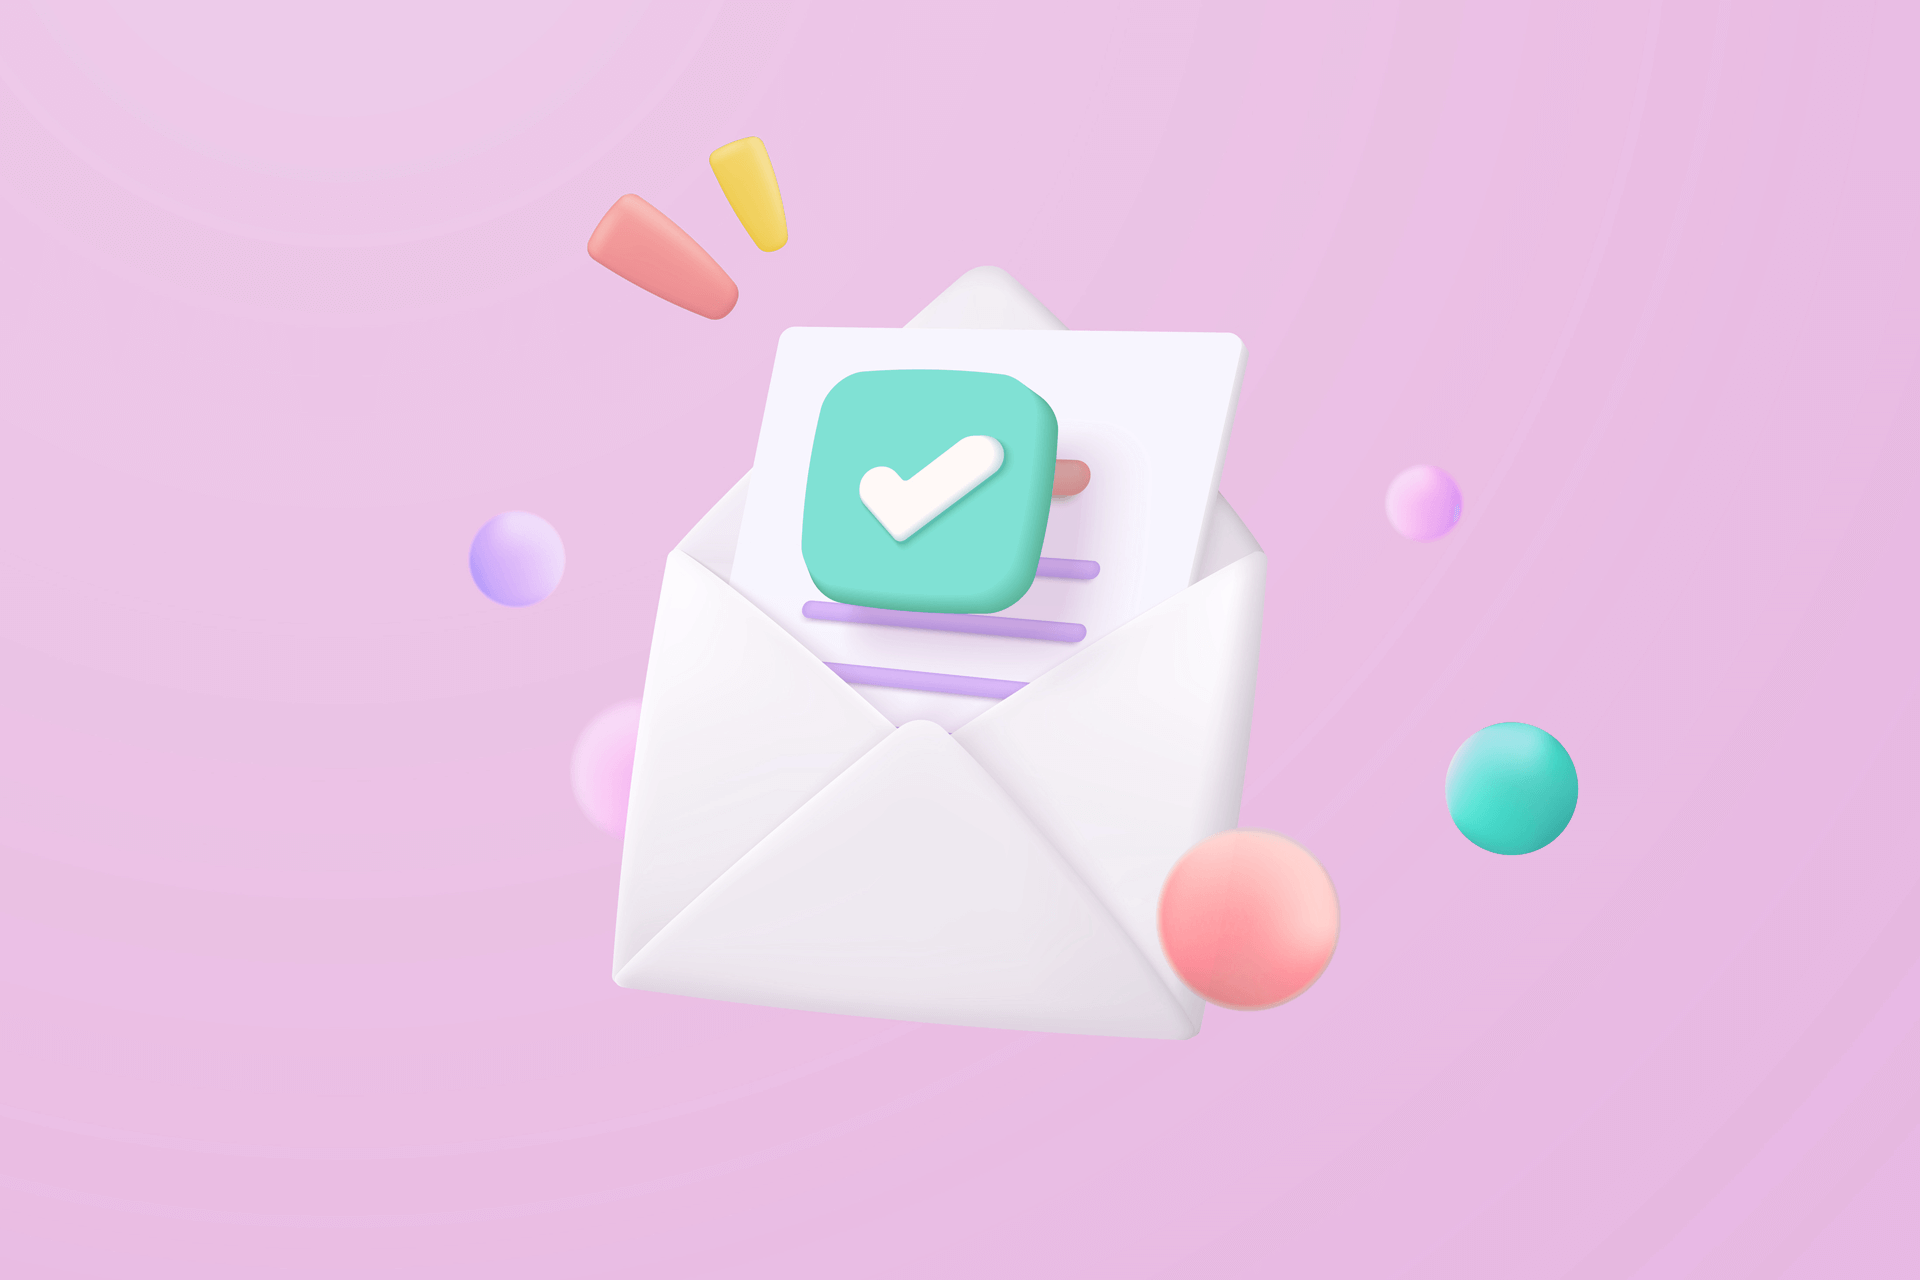 3D illustration of a letter or an email showcasing how to approach influencers through emails